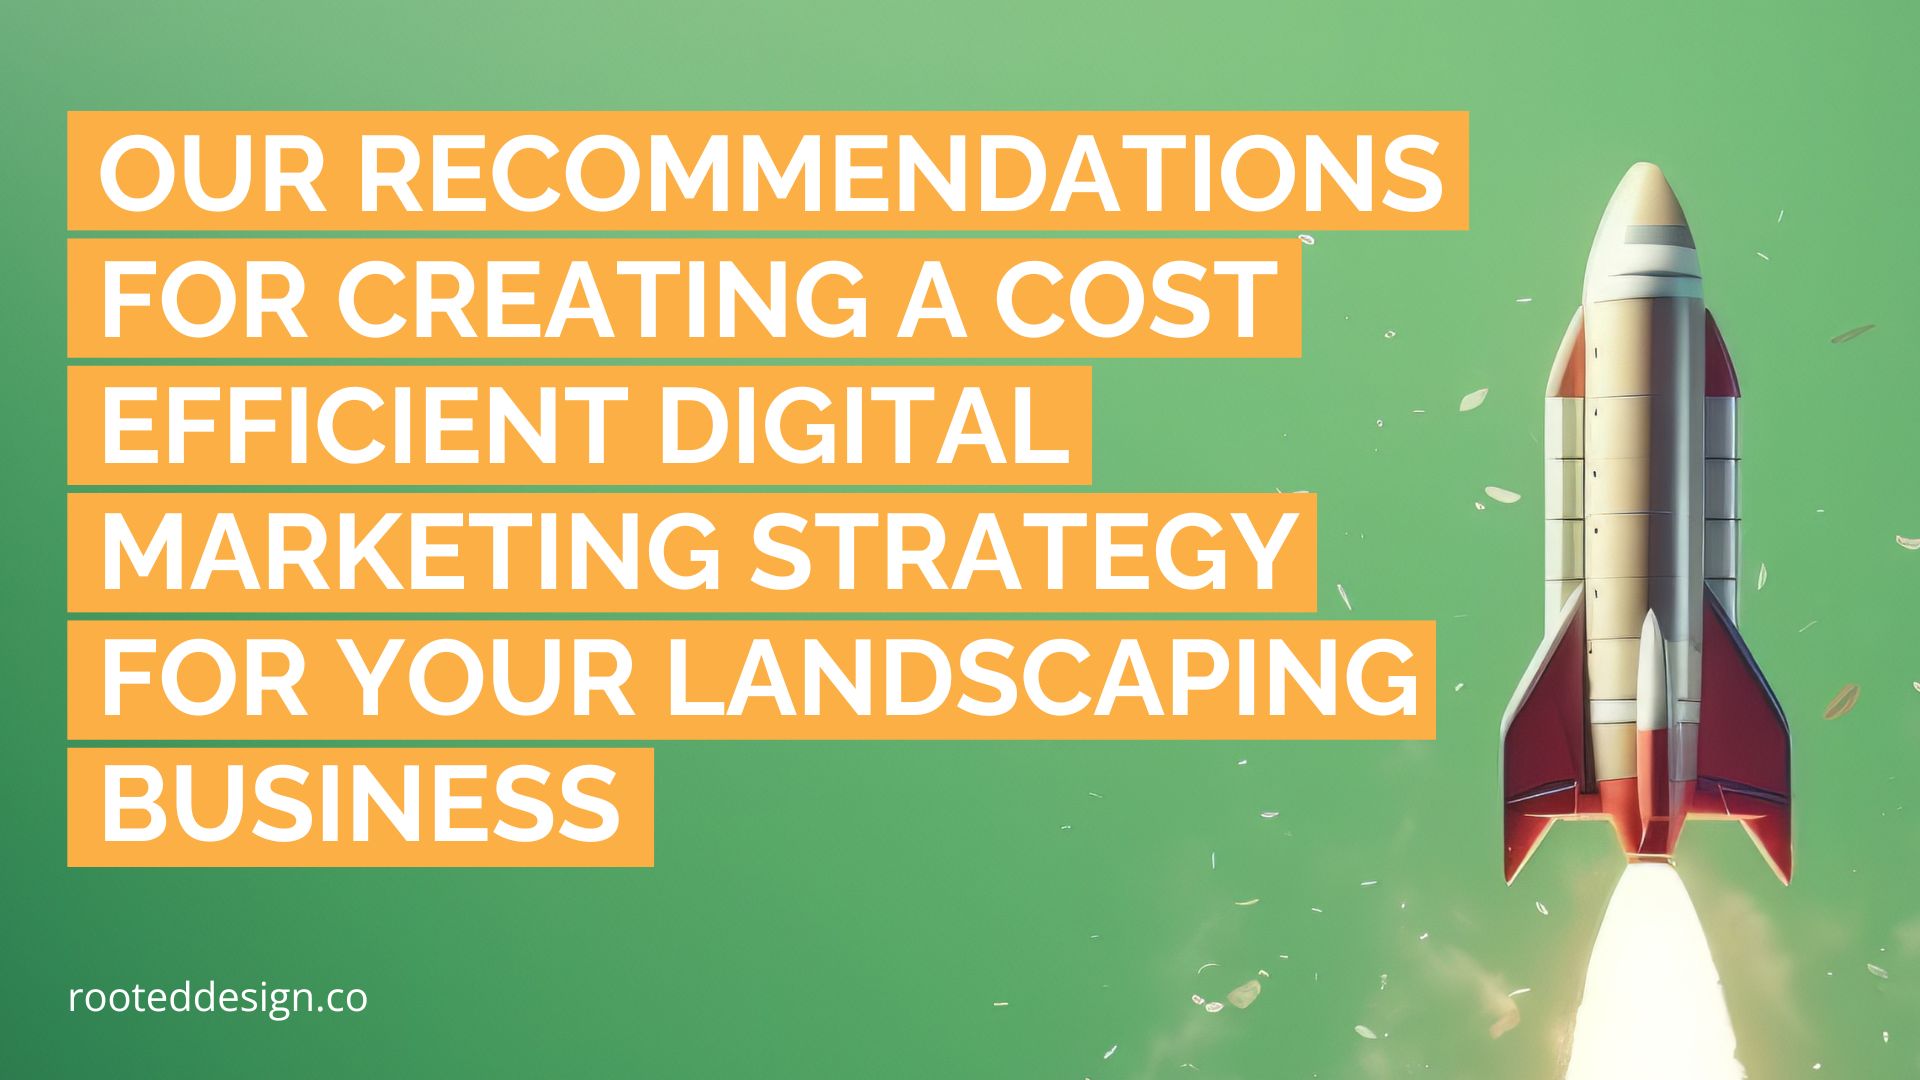 Our Recommendations for Creating a Cost Efficient Digital Marketing Strategy for Your Landscape Business image with a rocket taking off